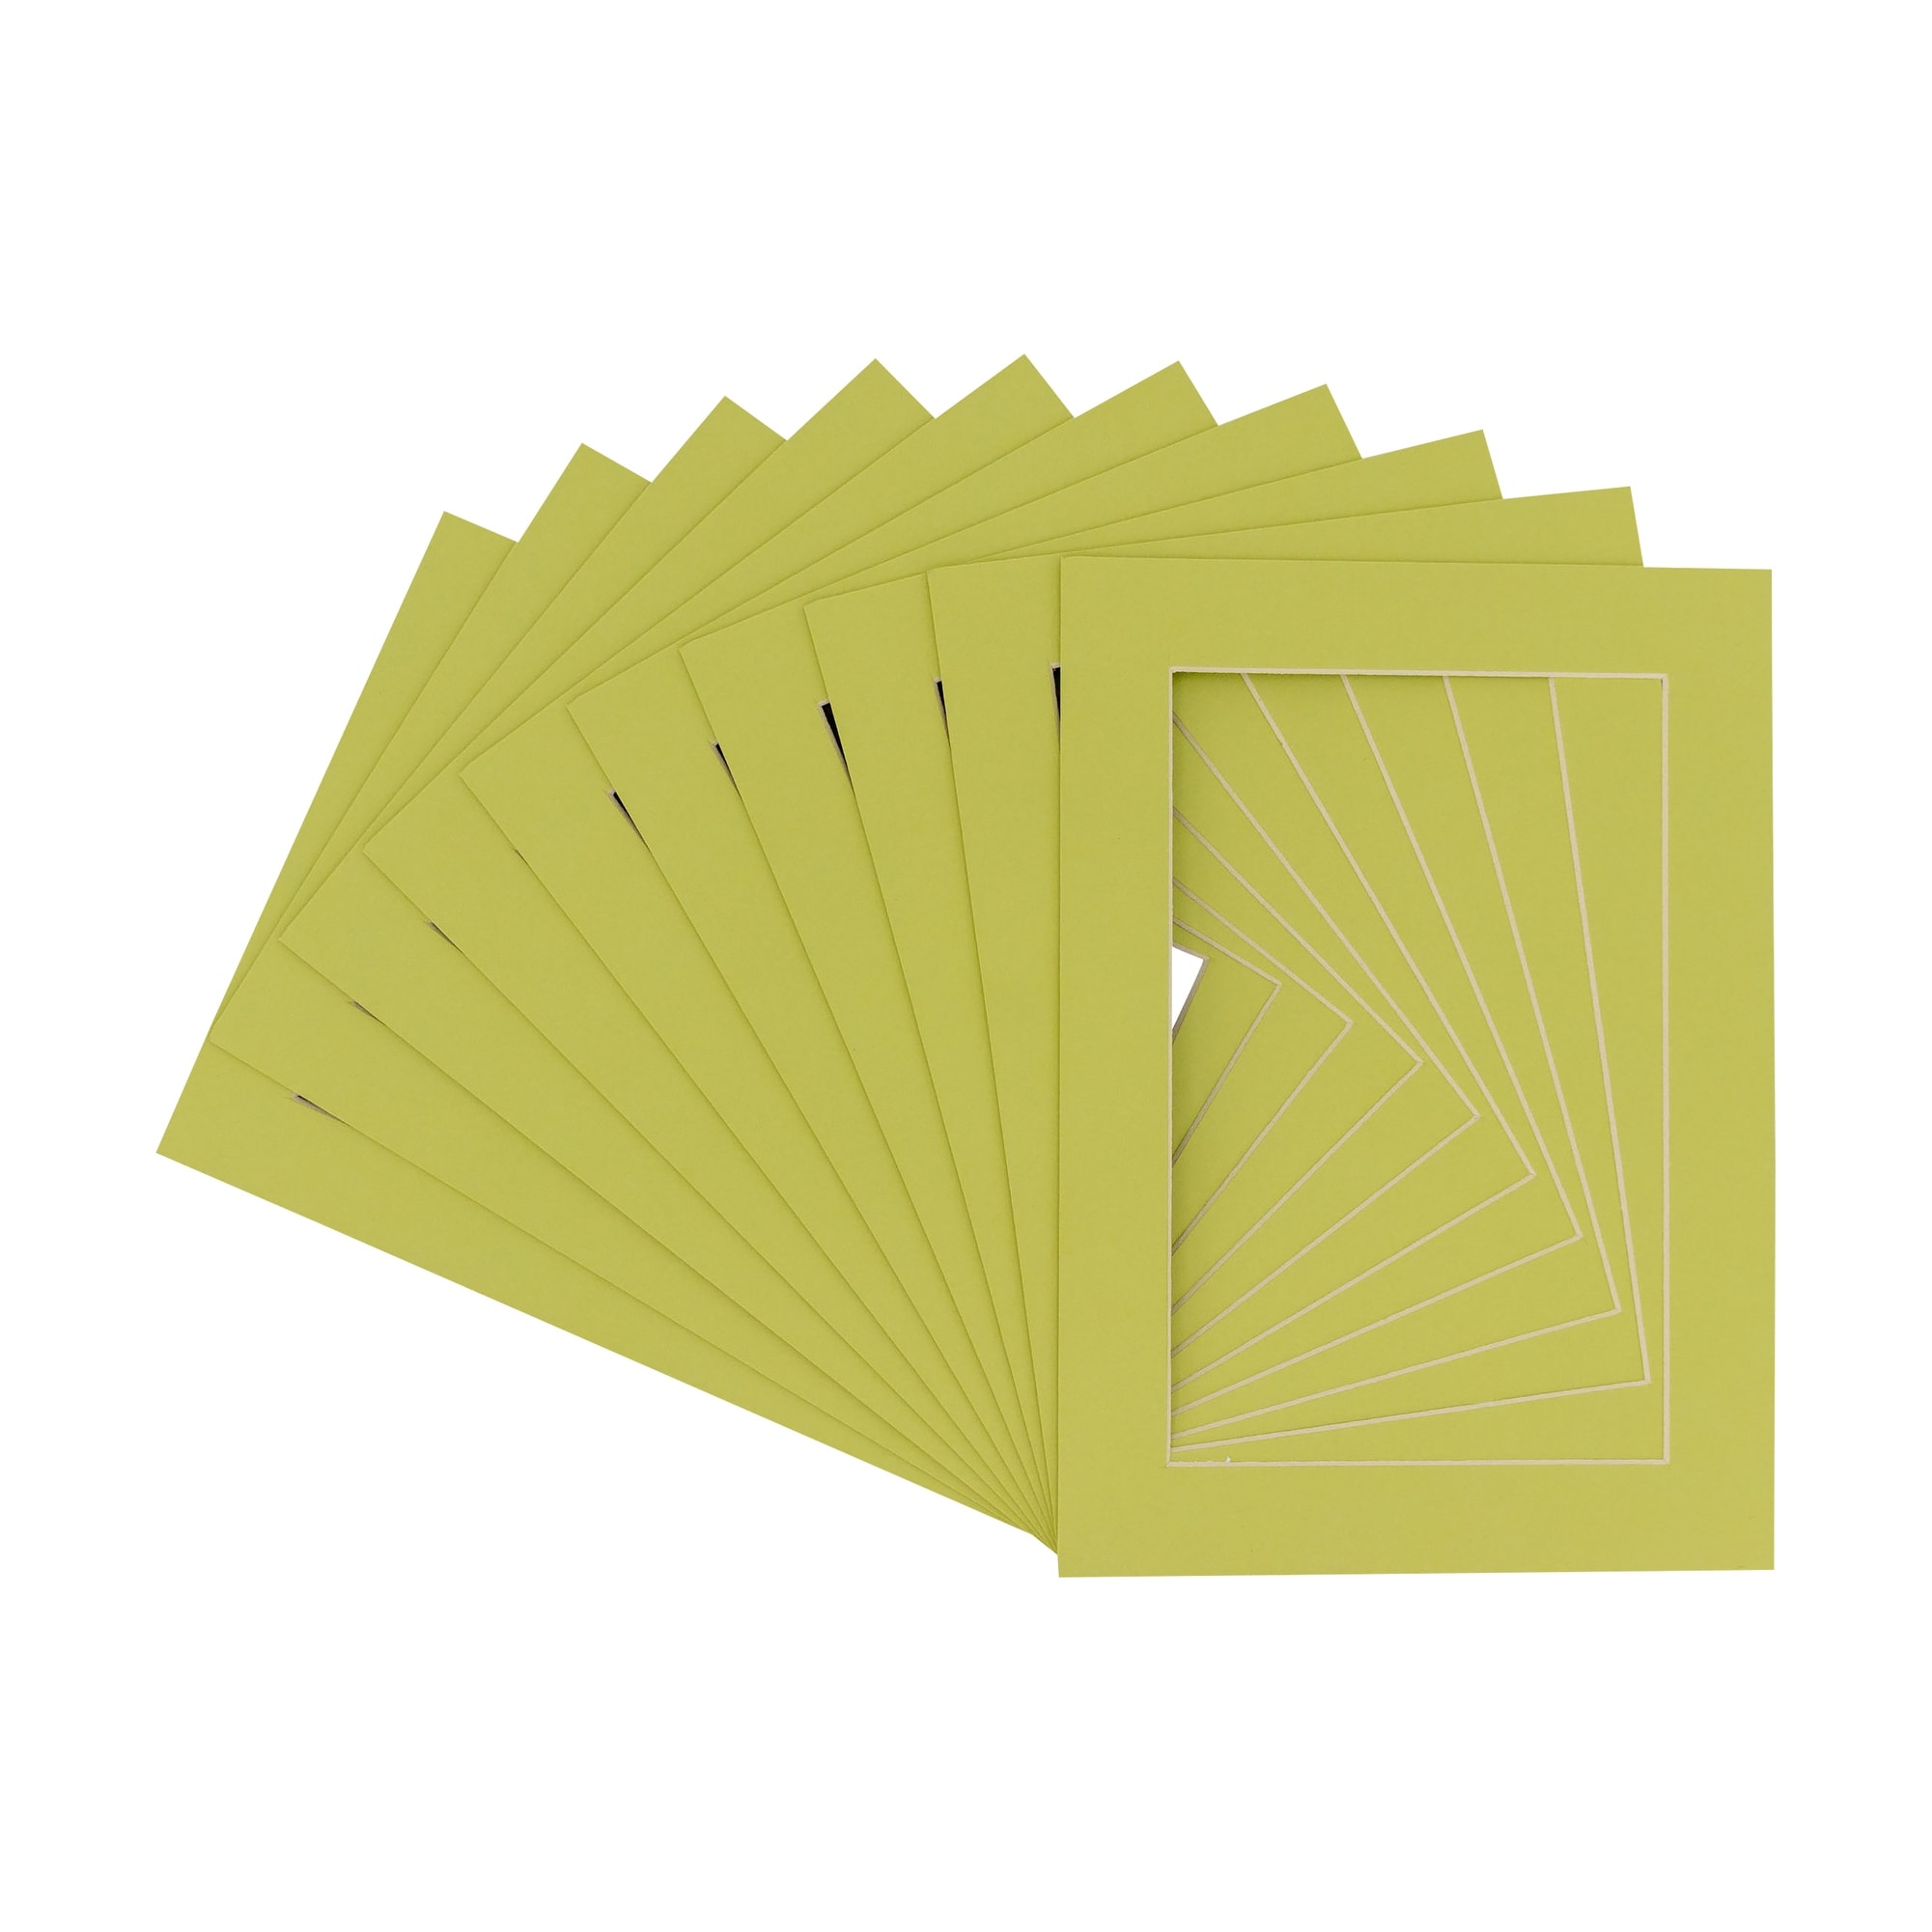 5x7 Mat for 8x10 Frame - Precut Mat Board Acid-Free Pistachio Green 5x7  Photo Matte Made to Fit a 8x10 Picture Frame - On Sale - Bed Bath & Beyond  - 38872494